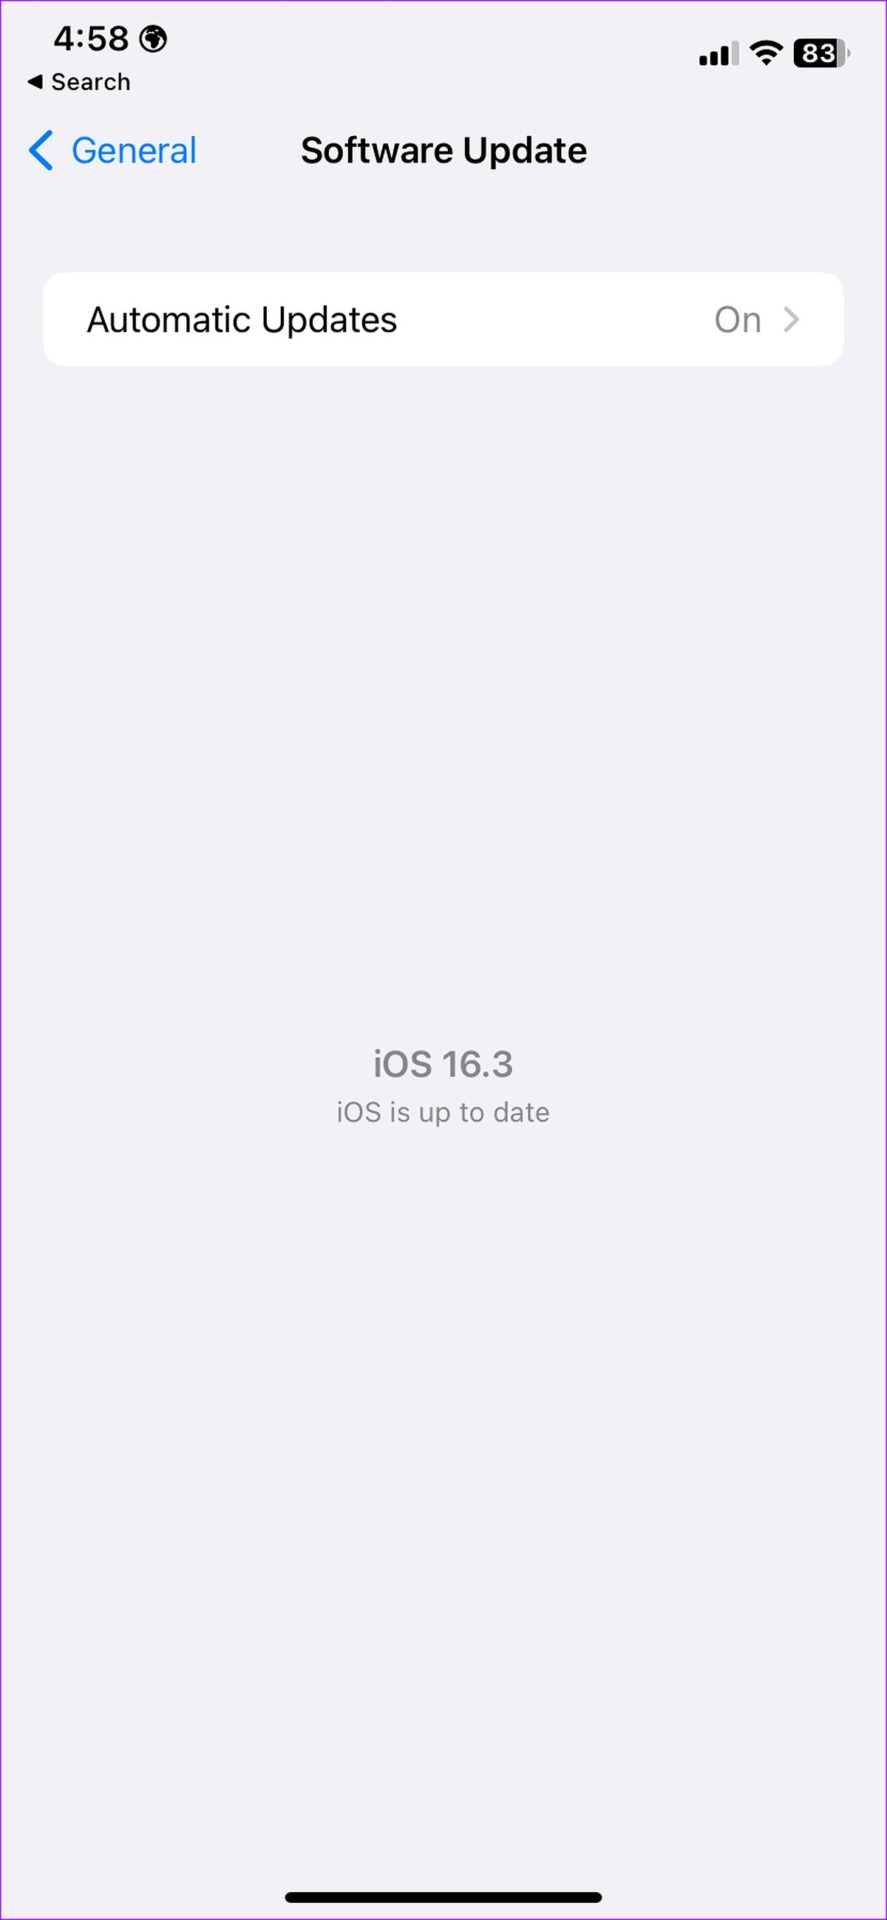 install iOS update on iPhone